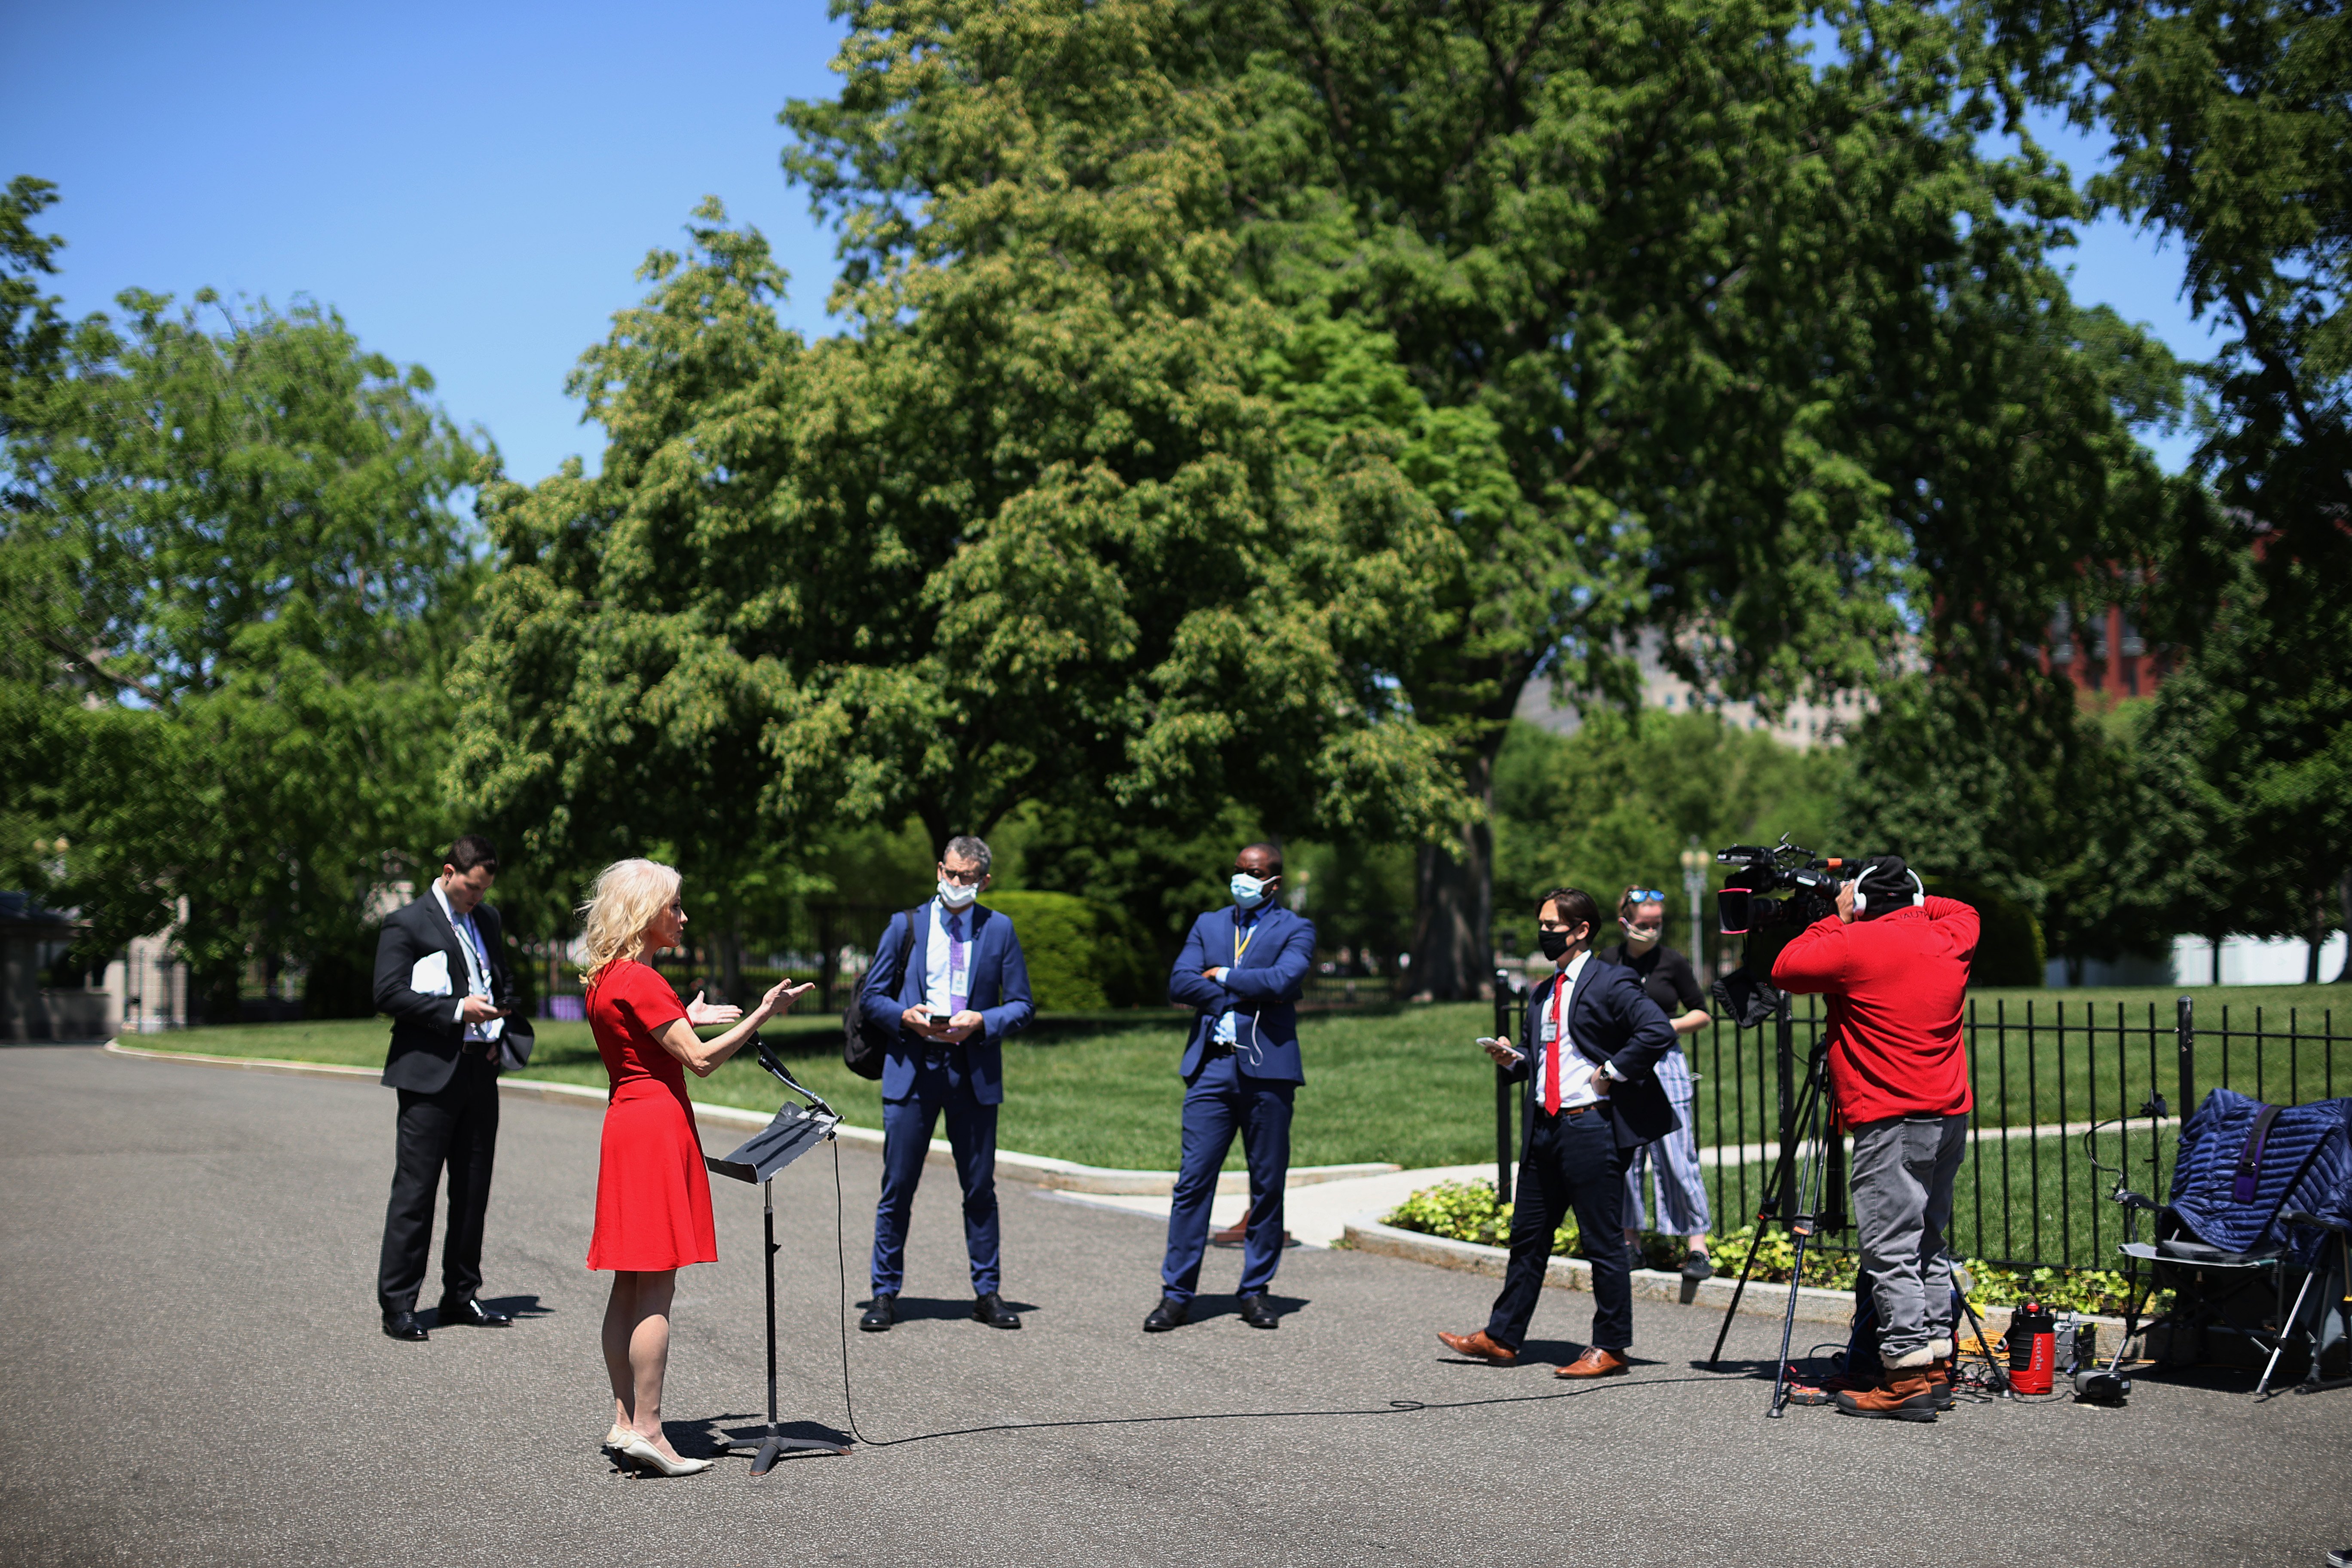 WASHINGTON, DC - MAY 07: Reporters maintain social distancing due to the novel coronavirus pandemic while asking White House Counselor to the President Kellyanne Conway questions outside the White House May 07, 2020 in Washington, DC. Conway participated in three television interviews before talking to the reporters. (Photo by Chip Somodevilla/Getty Images)